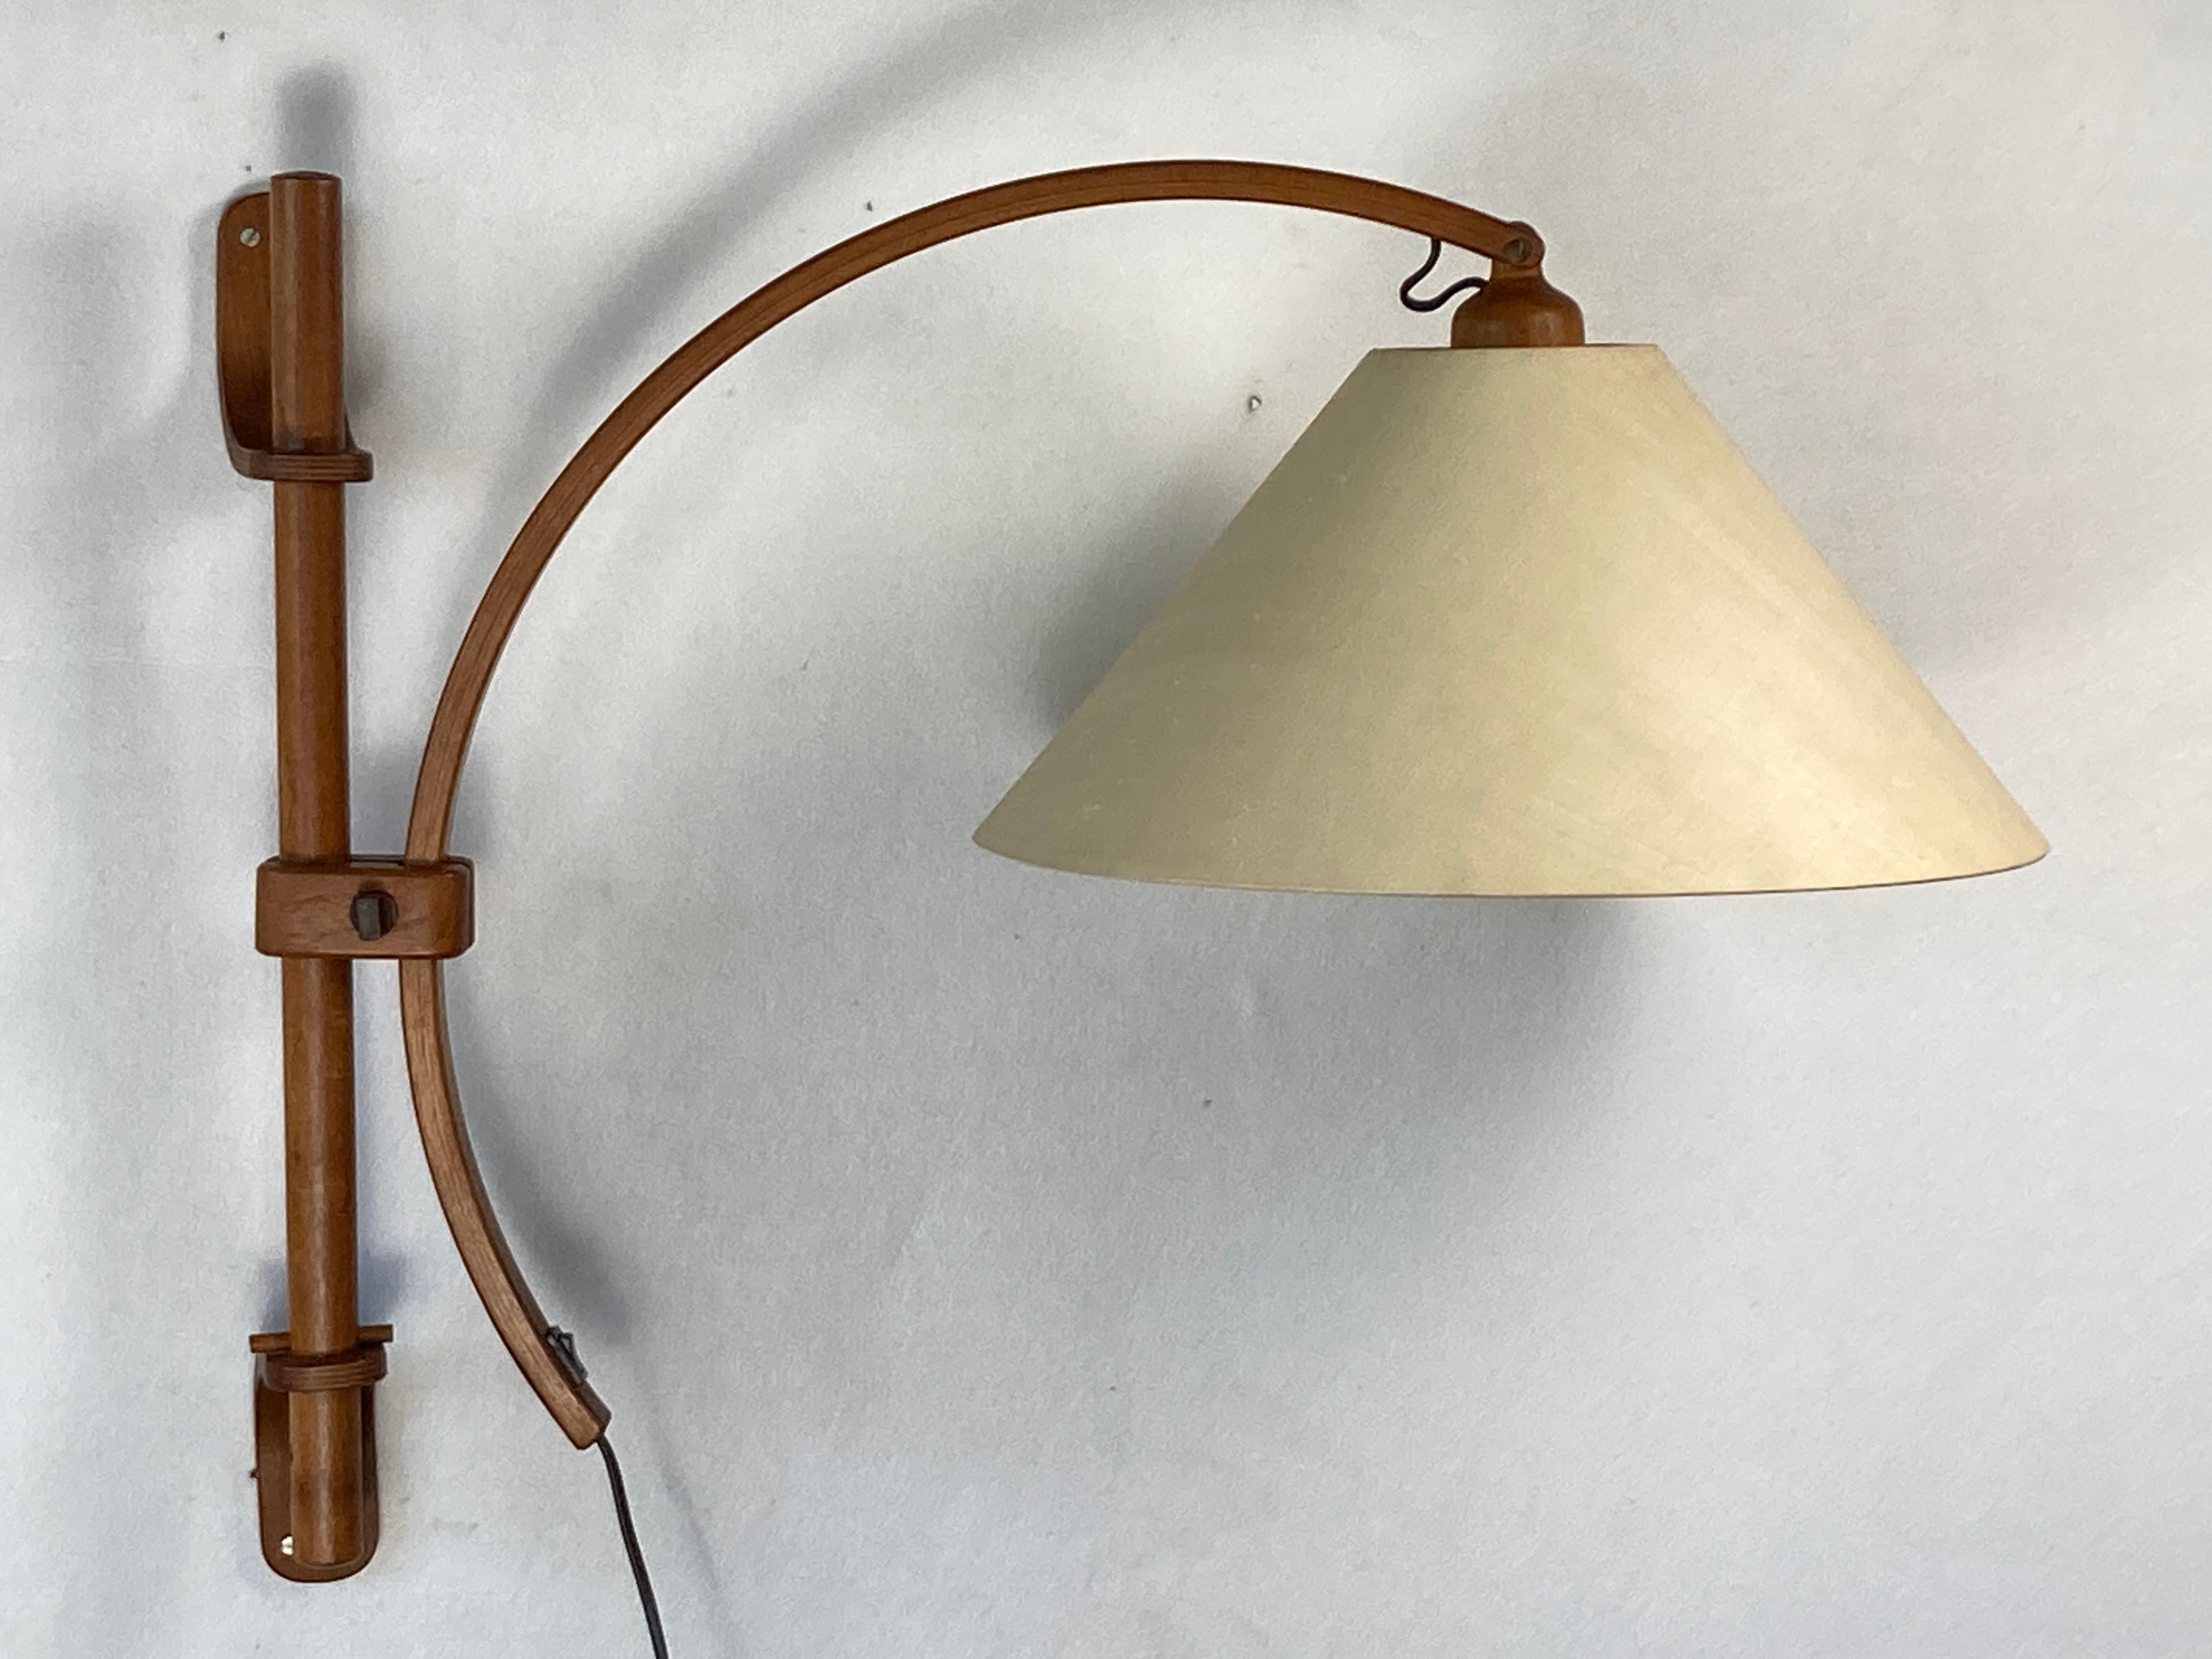 Wonderful Scandinavian Danish oak wall arc swing lamp, 1970s either by Domus or very much in its style. This adjustable swing lamp is in great condition with no real flaws to mention. The shade is without any dents, tears or anything, it only only